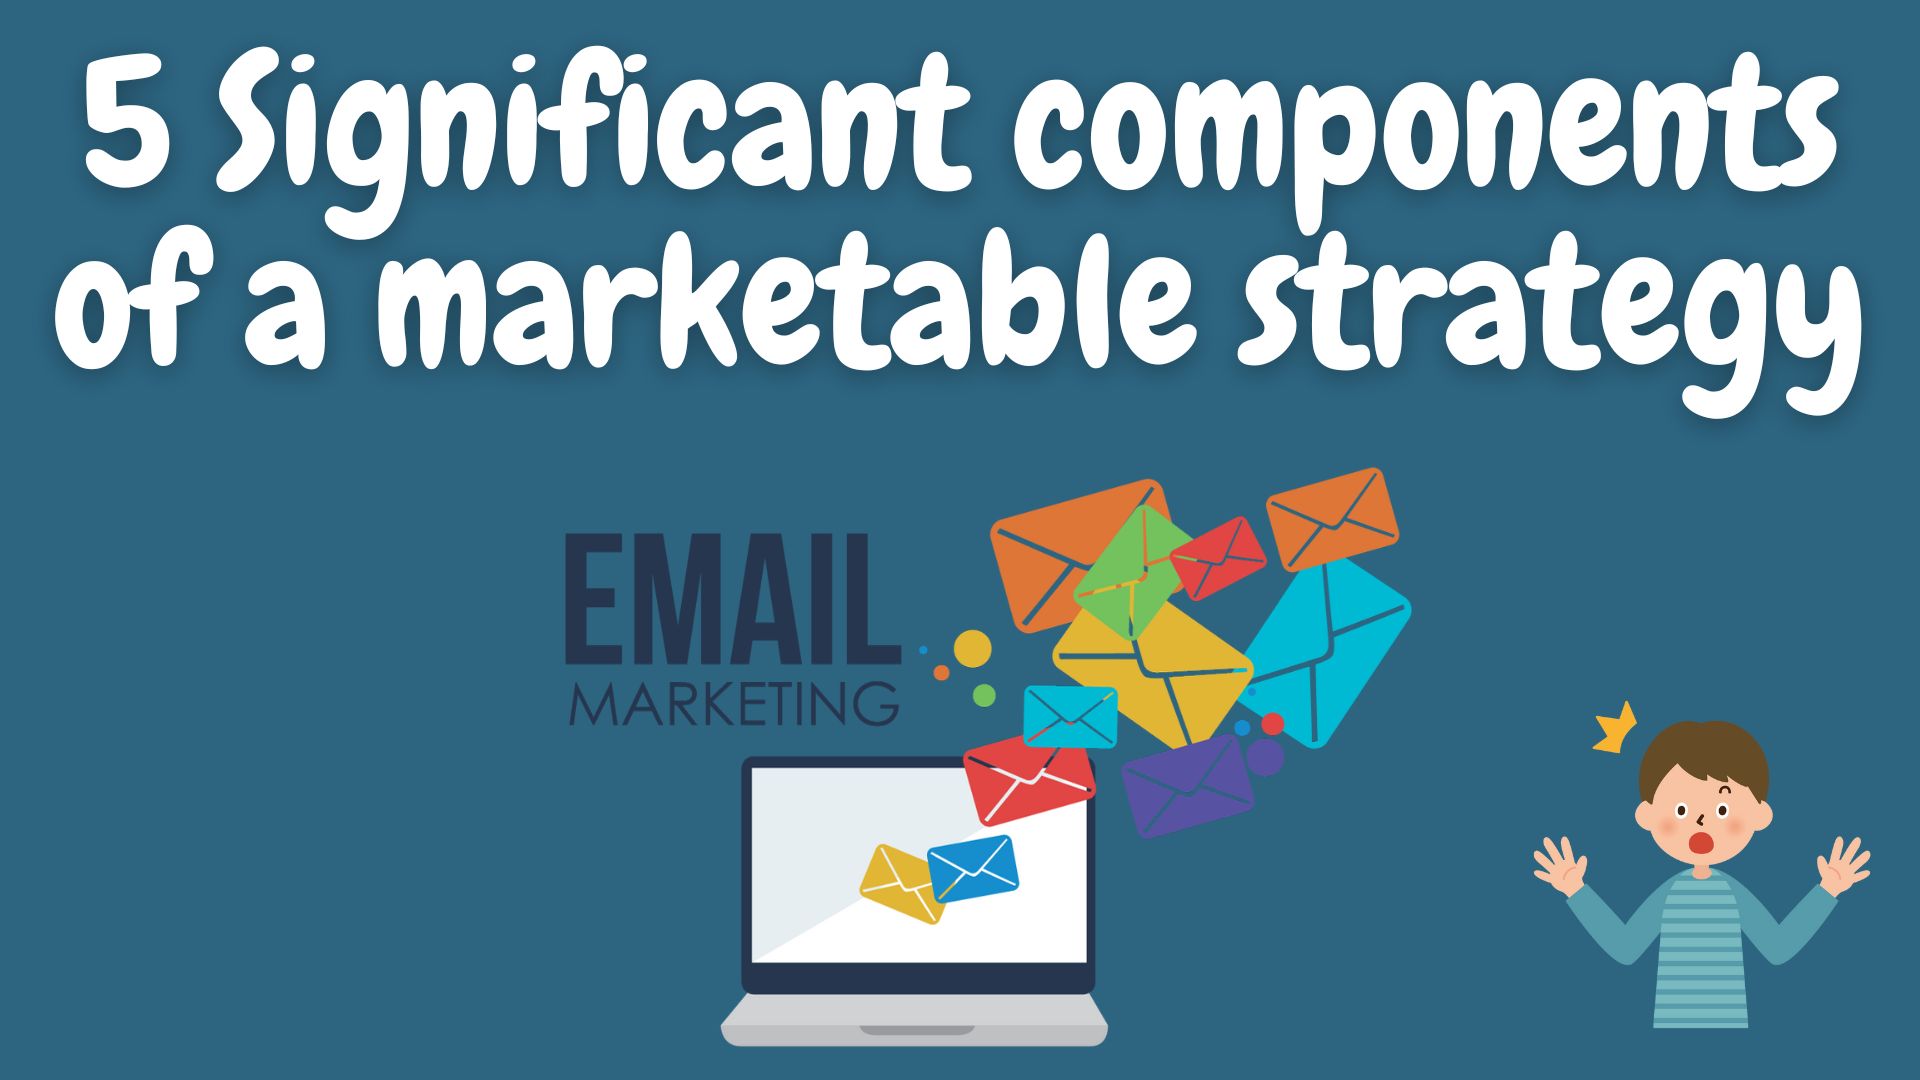 5 significant components of a marketable strategy